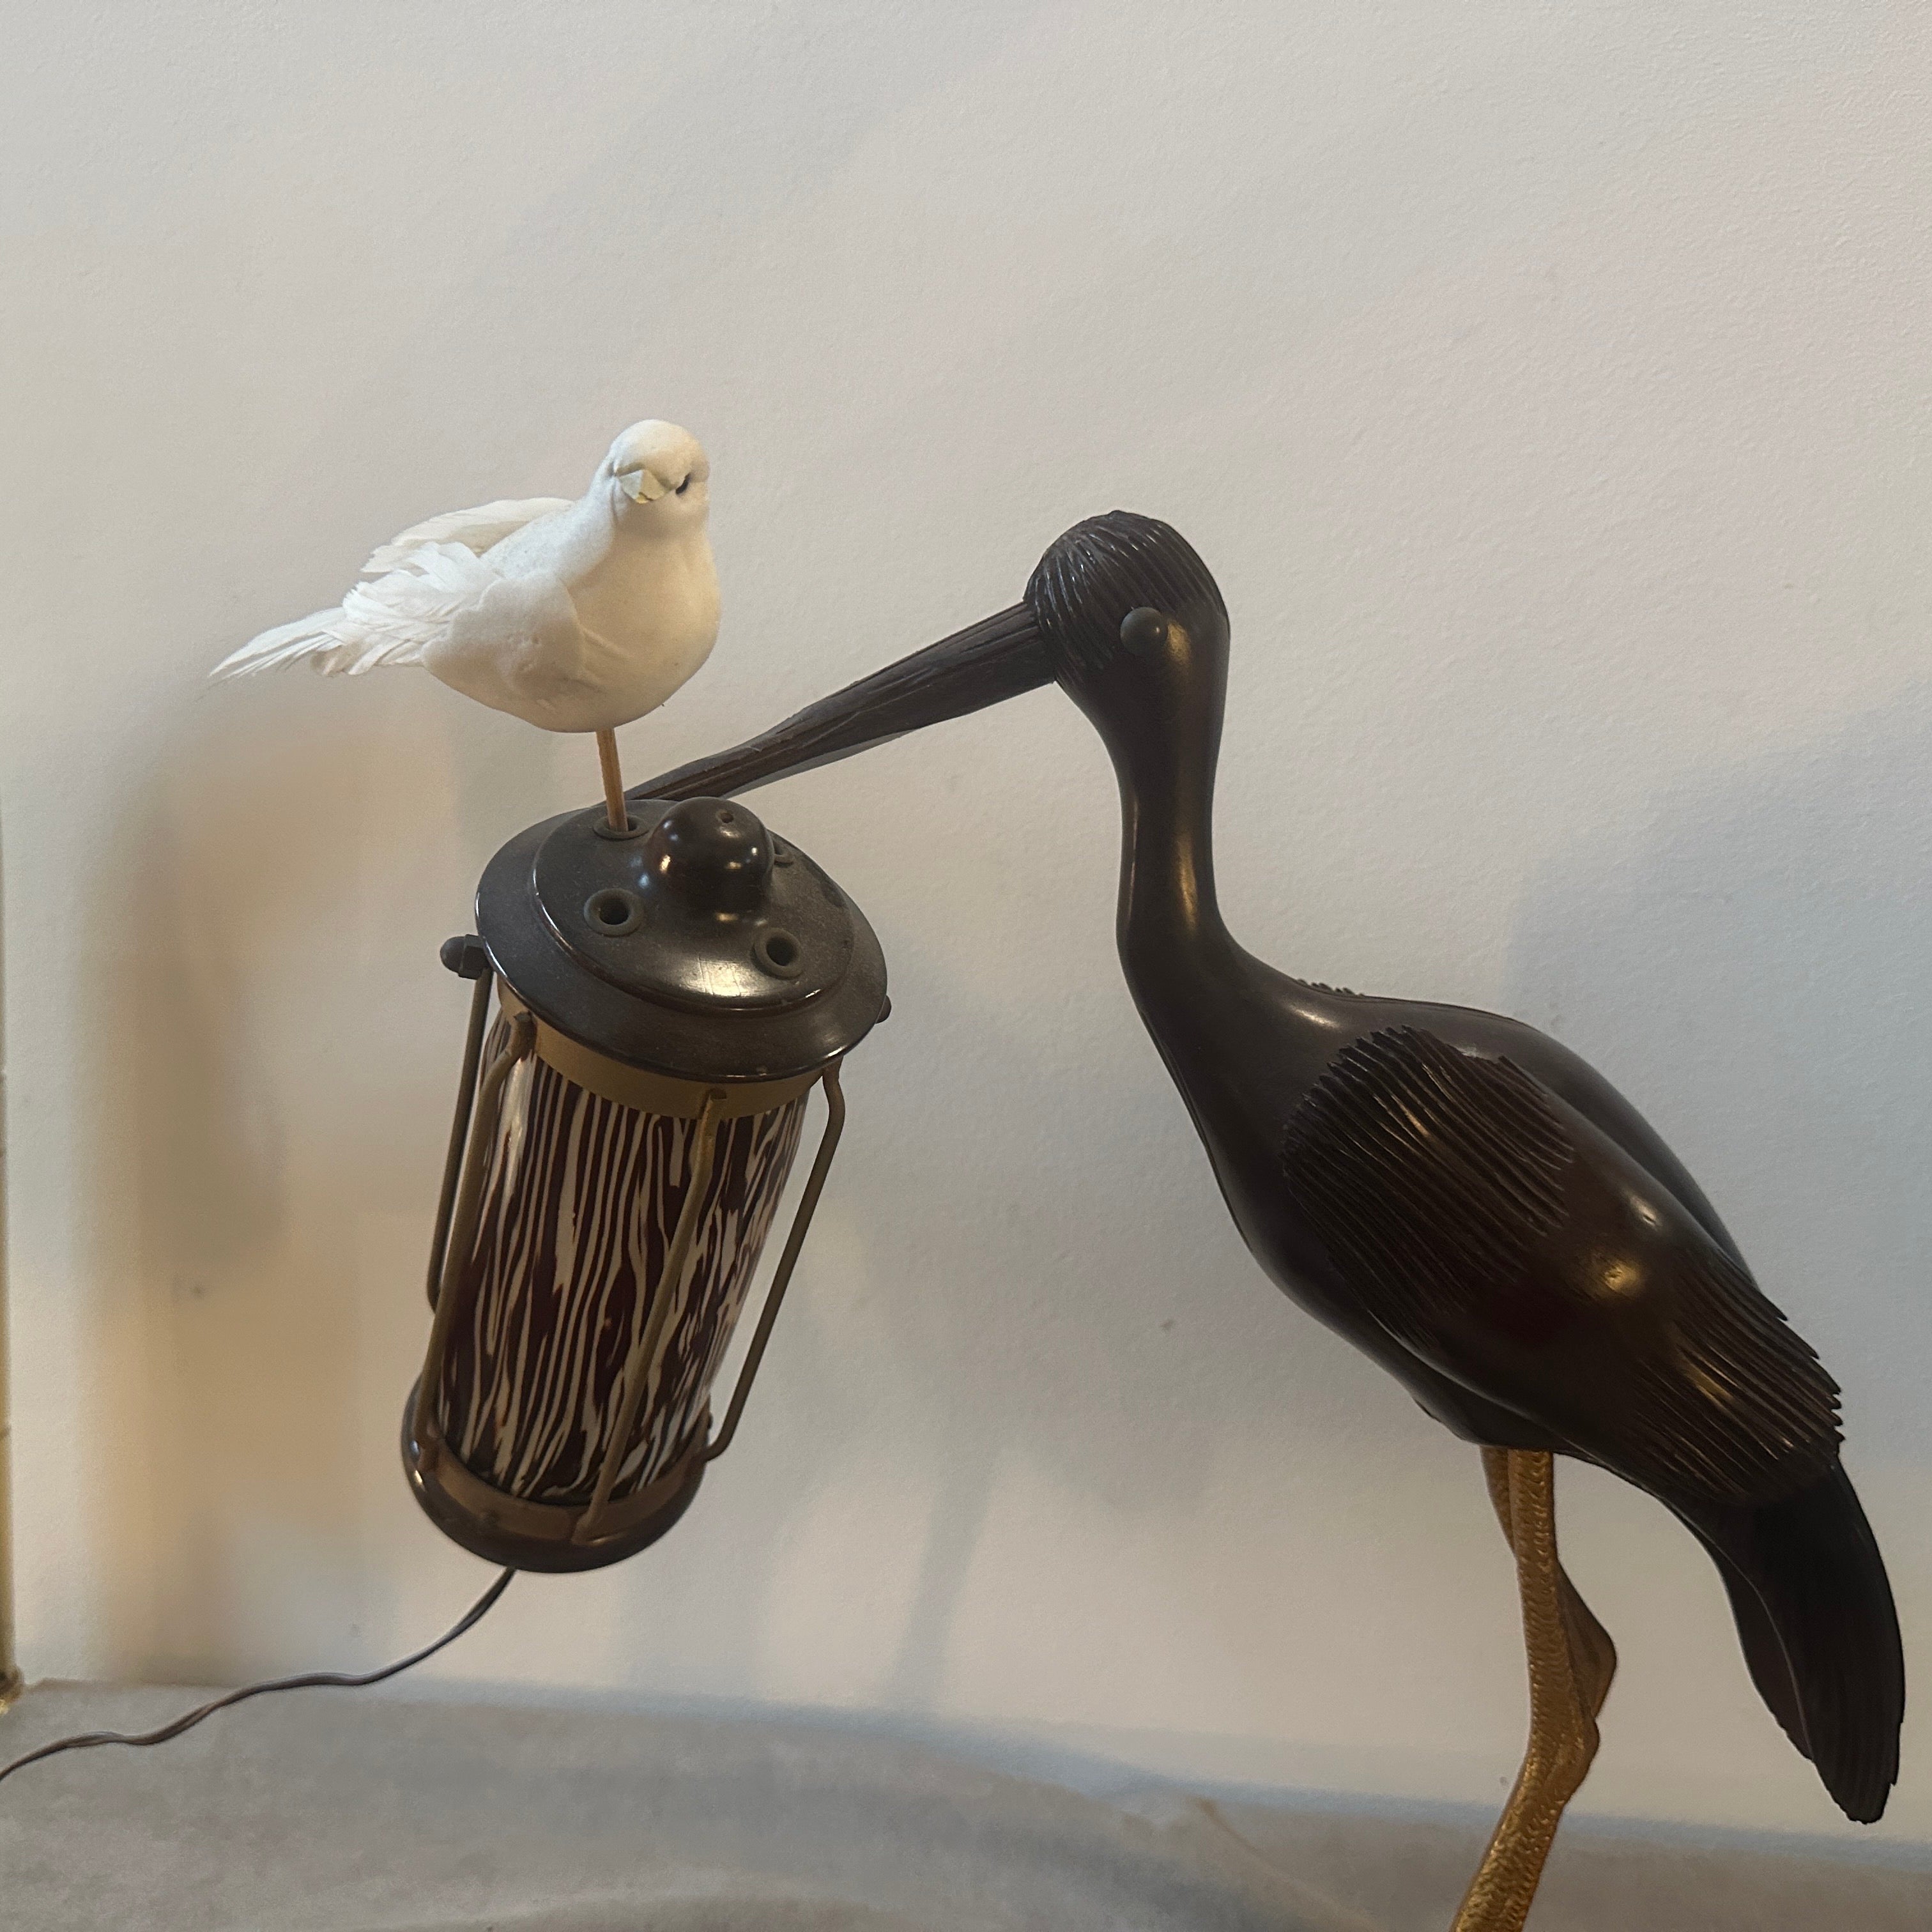 A wood and brass table lamp designed by Aldo Tura and manufactured by Macabo in the Fifties, the base of the lamp is also a smoking set. The wood sculpture depict an heron. the lamp has been rewired and it's in working order. In the 1950s, the